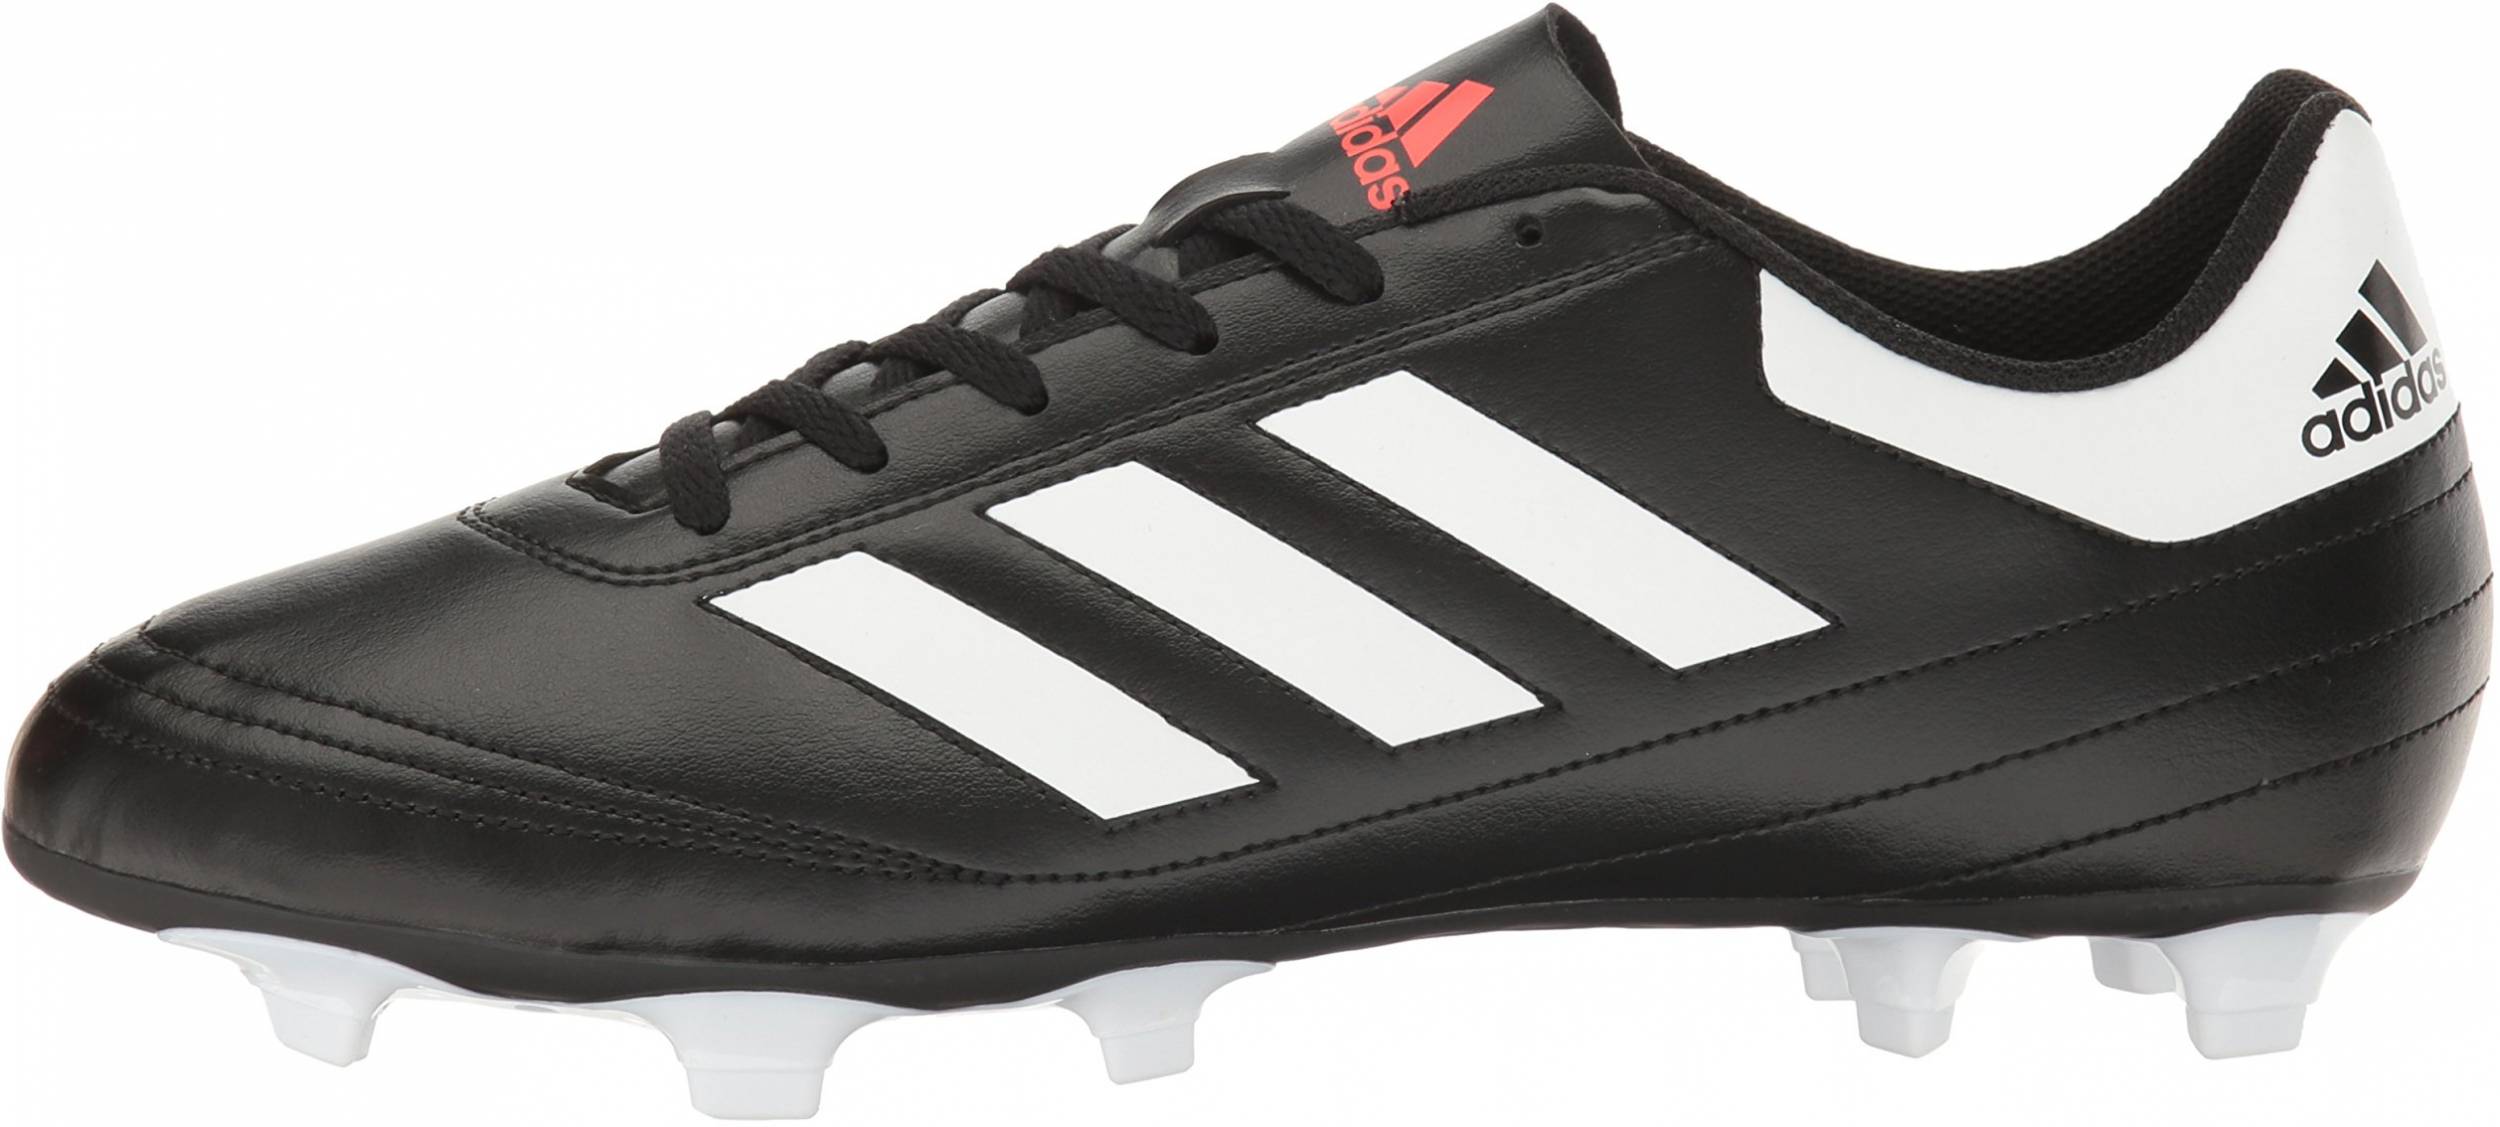 adidas soccer cleats black and white